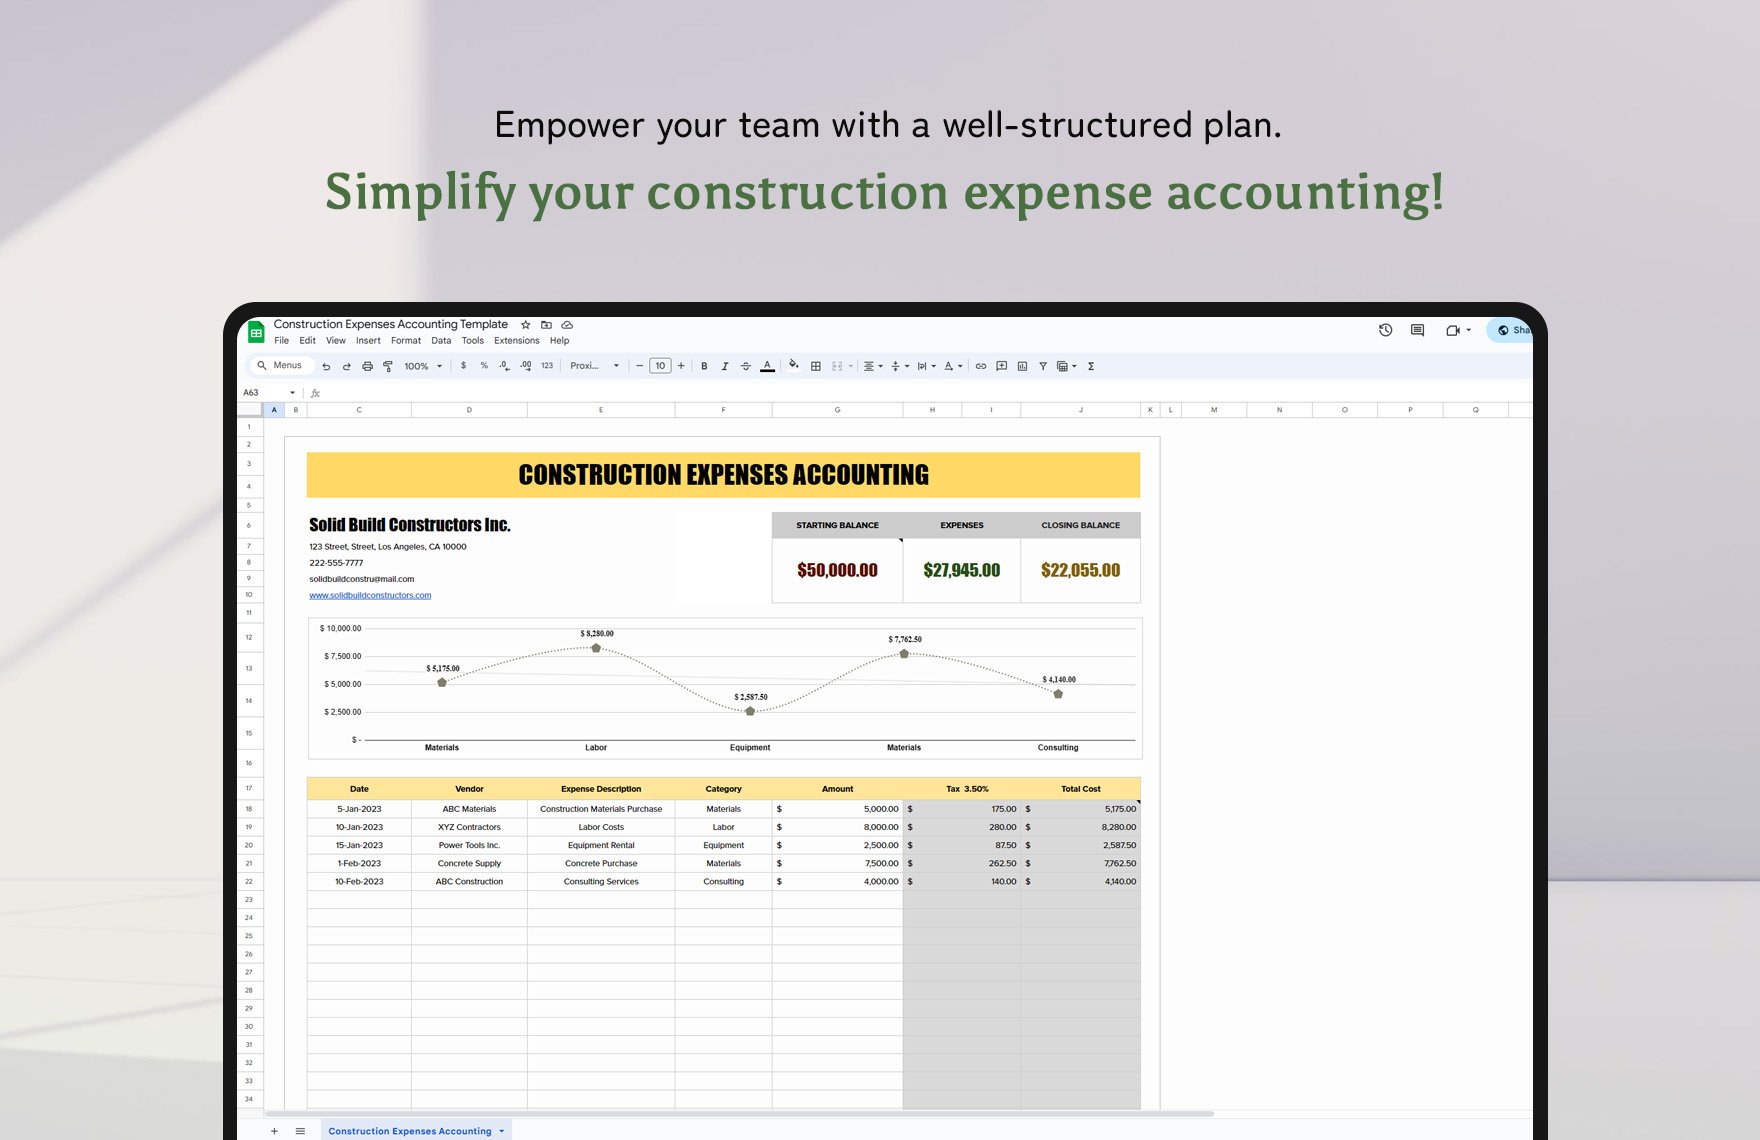 Construction Expenses Accounting Template